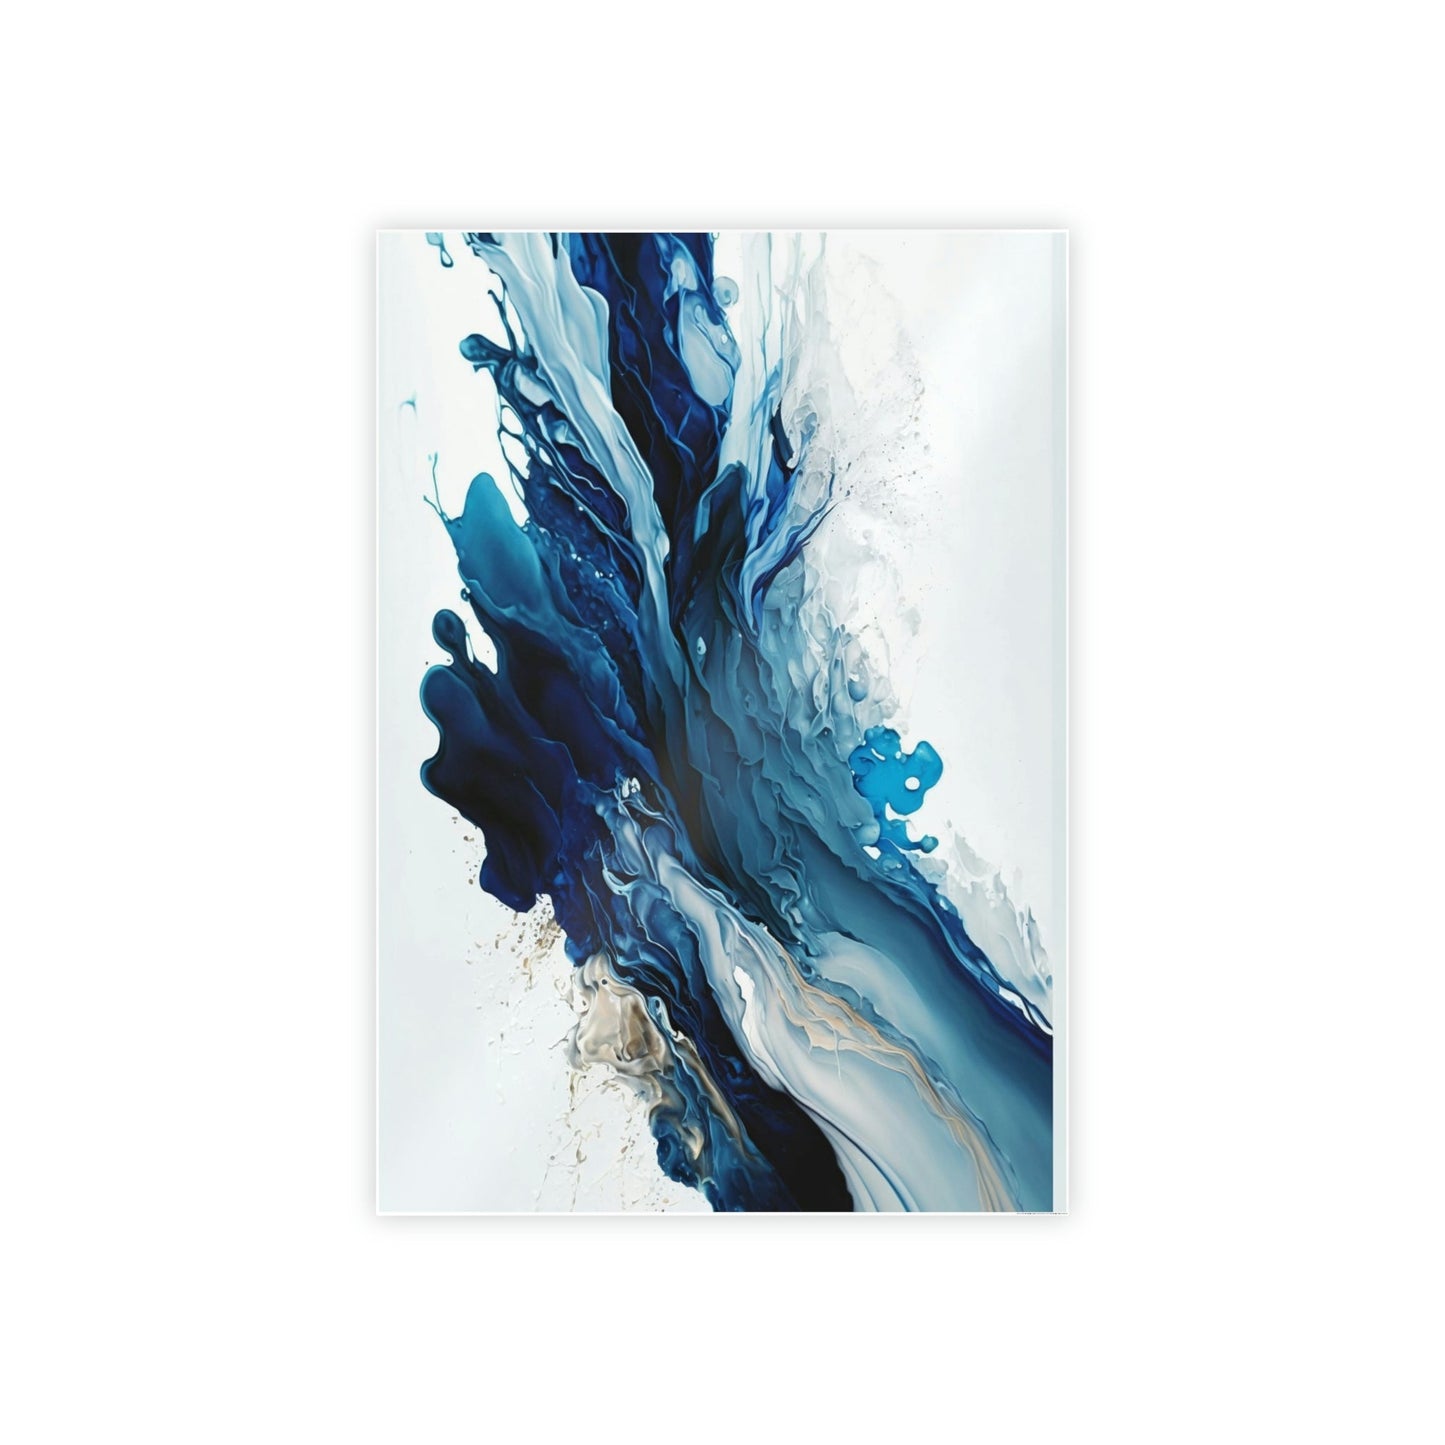 Blue Harmony: A Framed Poster & Canvas Print of a Blue and White Abstract Artwork